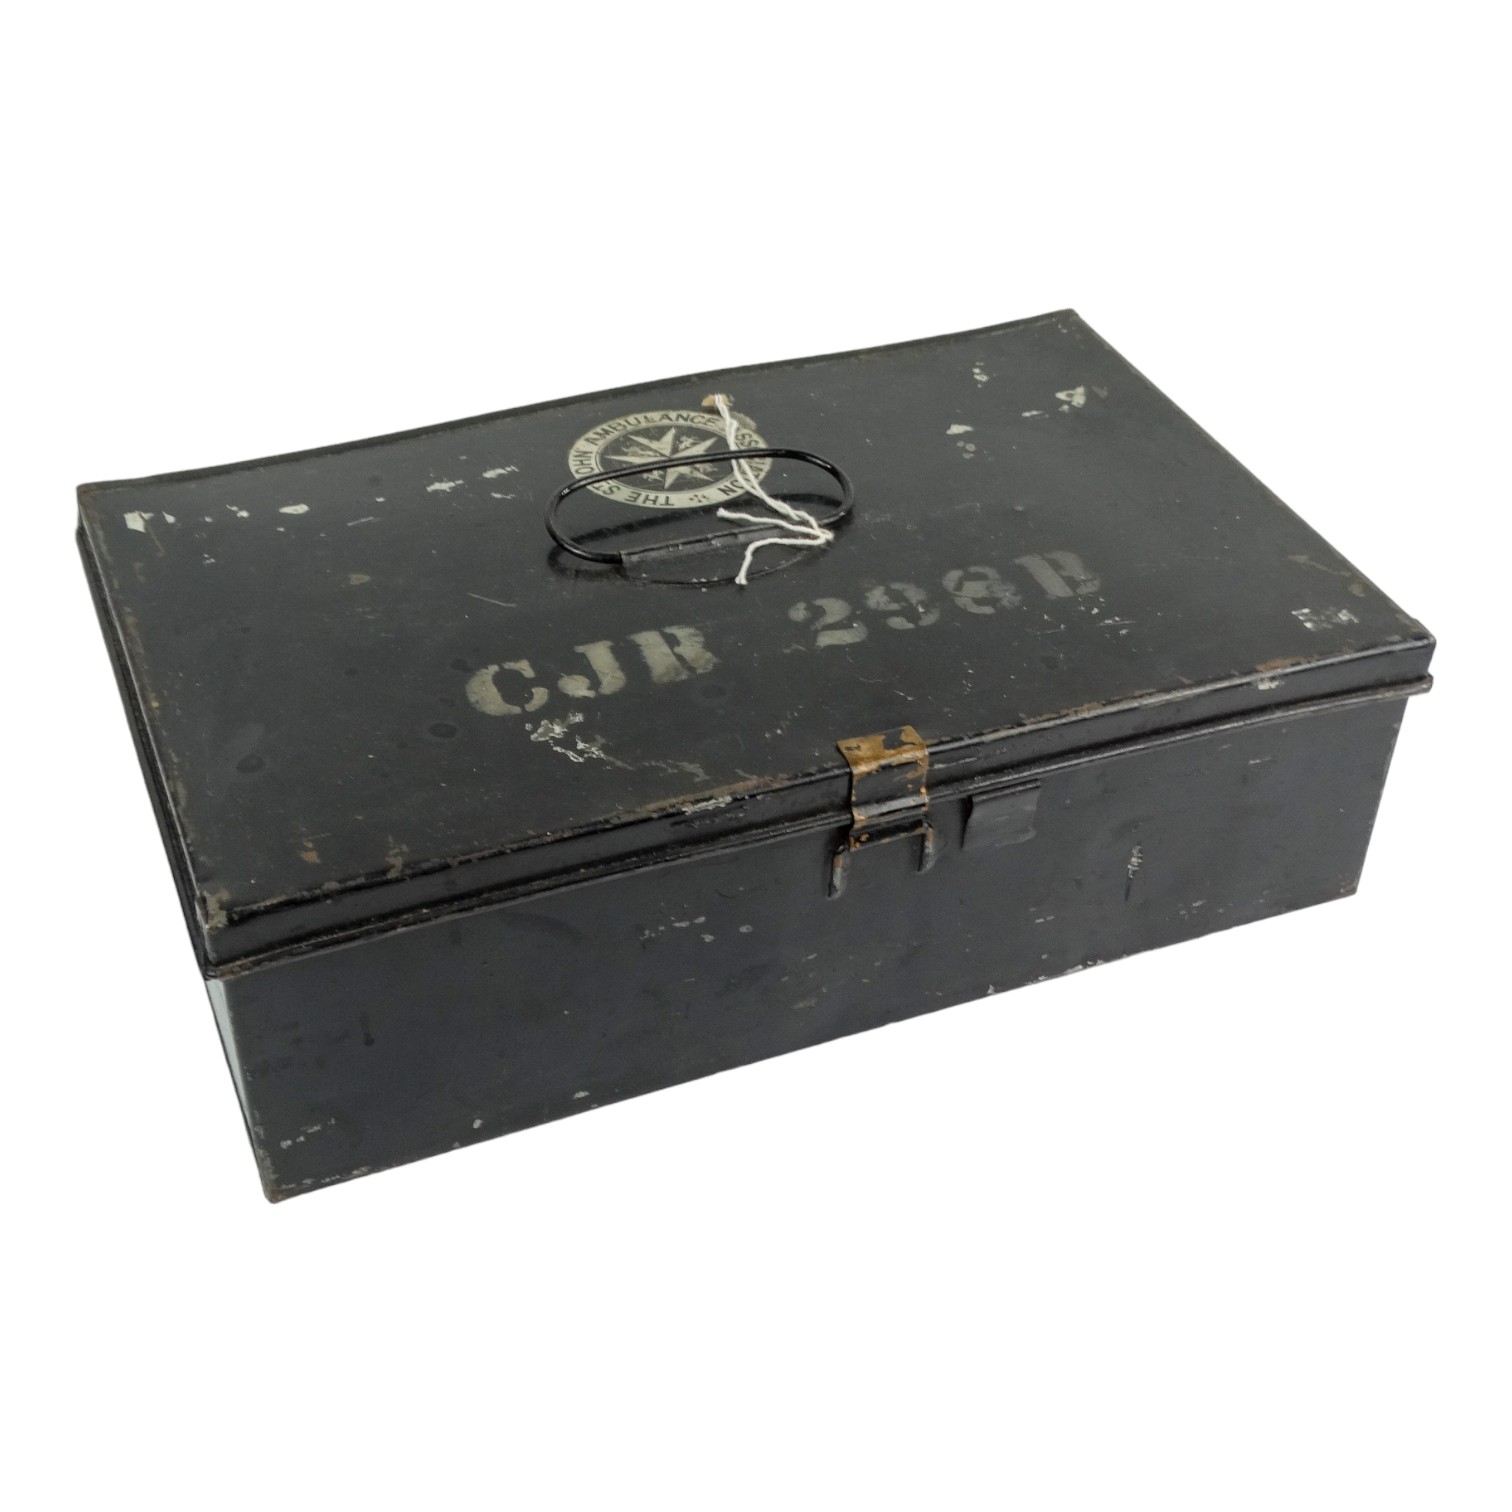 A St John Ambulance First Aid box - the black steel trunk with contents, including splints and